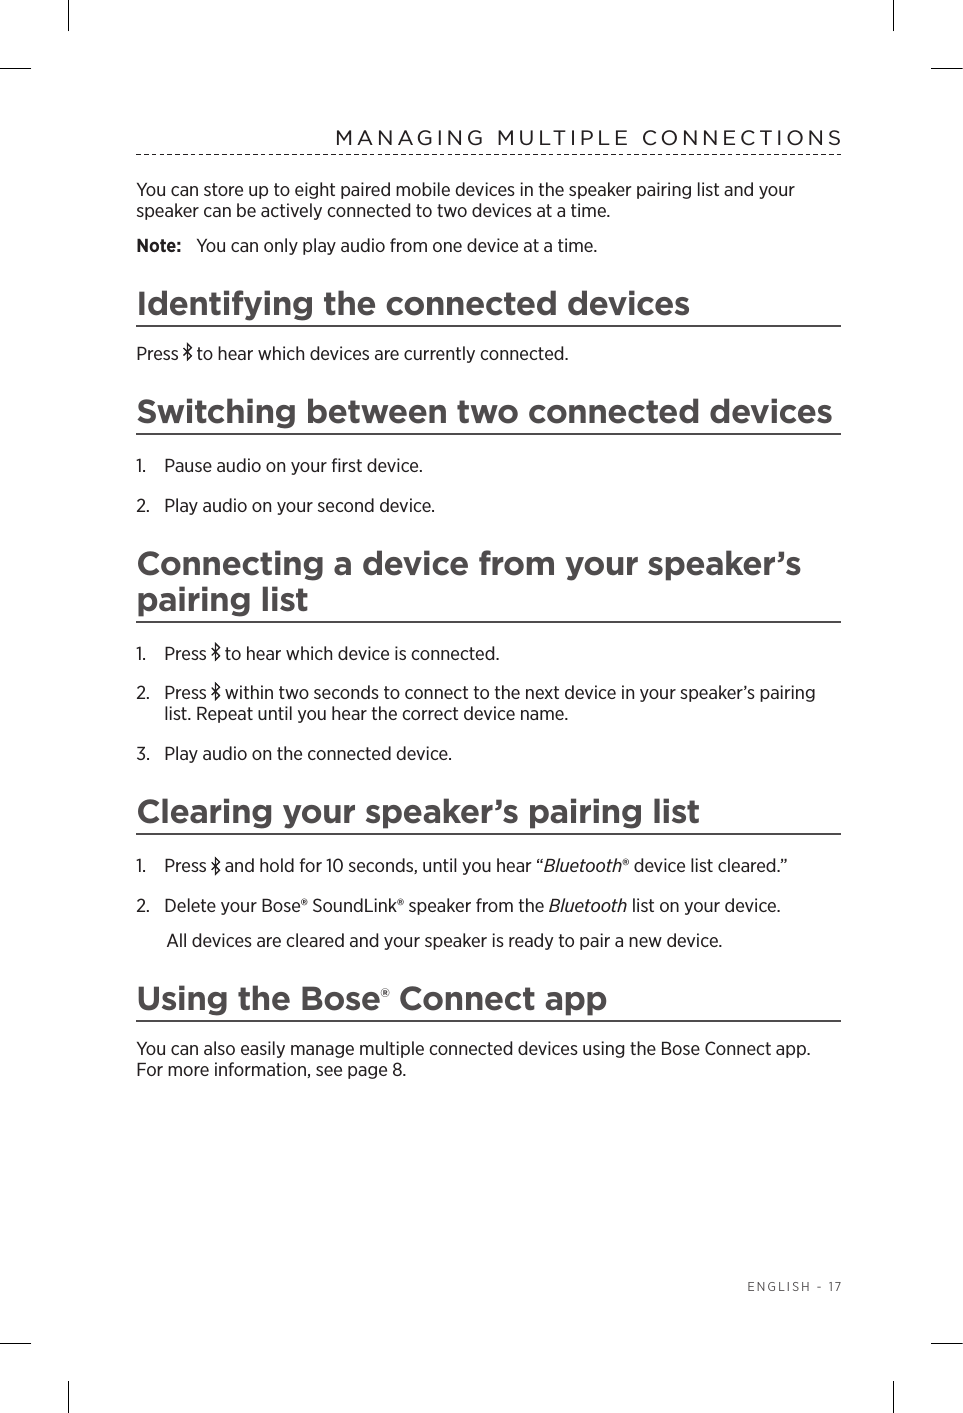  ENGLISH - 17MANAGING MULTIPLE CONNECTIONSYou can store up to eight paired mobile devices in the speaker pairing list and your speaker can  be actively connected to two devices at a time. Note:  You can only play audio from one device at a time. Identifying the connected devicesPress   to hear which devices are  currently  connected.Switching between two connected devices1.  Pause audio on your ﬁrst device.2.  Play audio on your second device.Connecting a device from your speaker’s pairing list1.  Press   to hear which device is connected.2.  Press   within two seconds to connect to the next  device in your  speaker’s pairing list. Repeat until you hear the correct device name.3.  Play audio on the connected device.Clearing your speaker’s pairing list1.  Press   and hold for 10 seconds, until you hear  “Bluetooth® device list cleared.” 2.  Delete your Bose® SoundLink® speaker from the Bluetooth list on your device.All devices are cleared and your speaker is ready to pair a new device.Using the Bose® Connect appYou can also easily manage multiple connected devices using the Bose Connect app. For more information, see page 8.